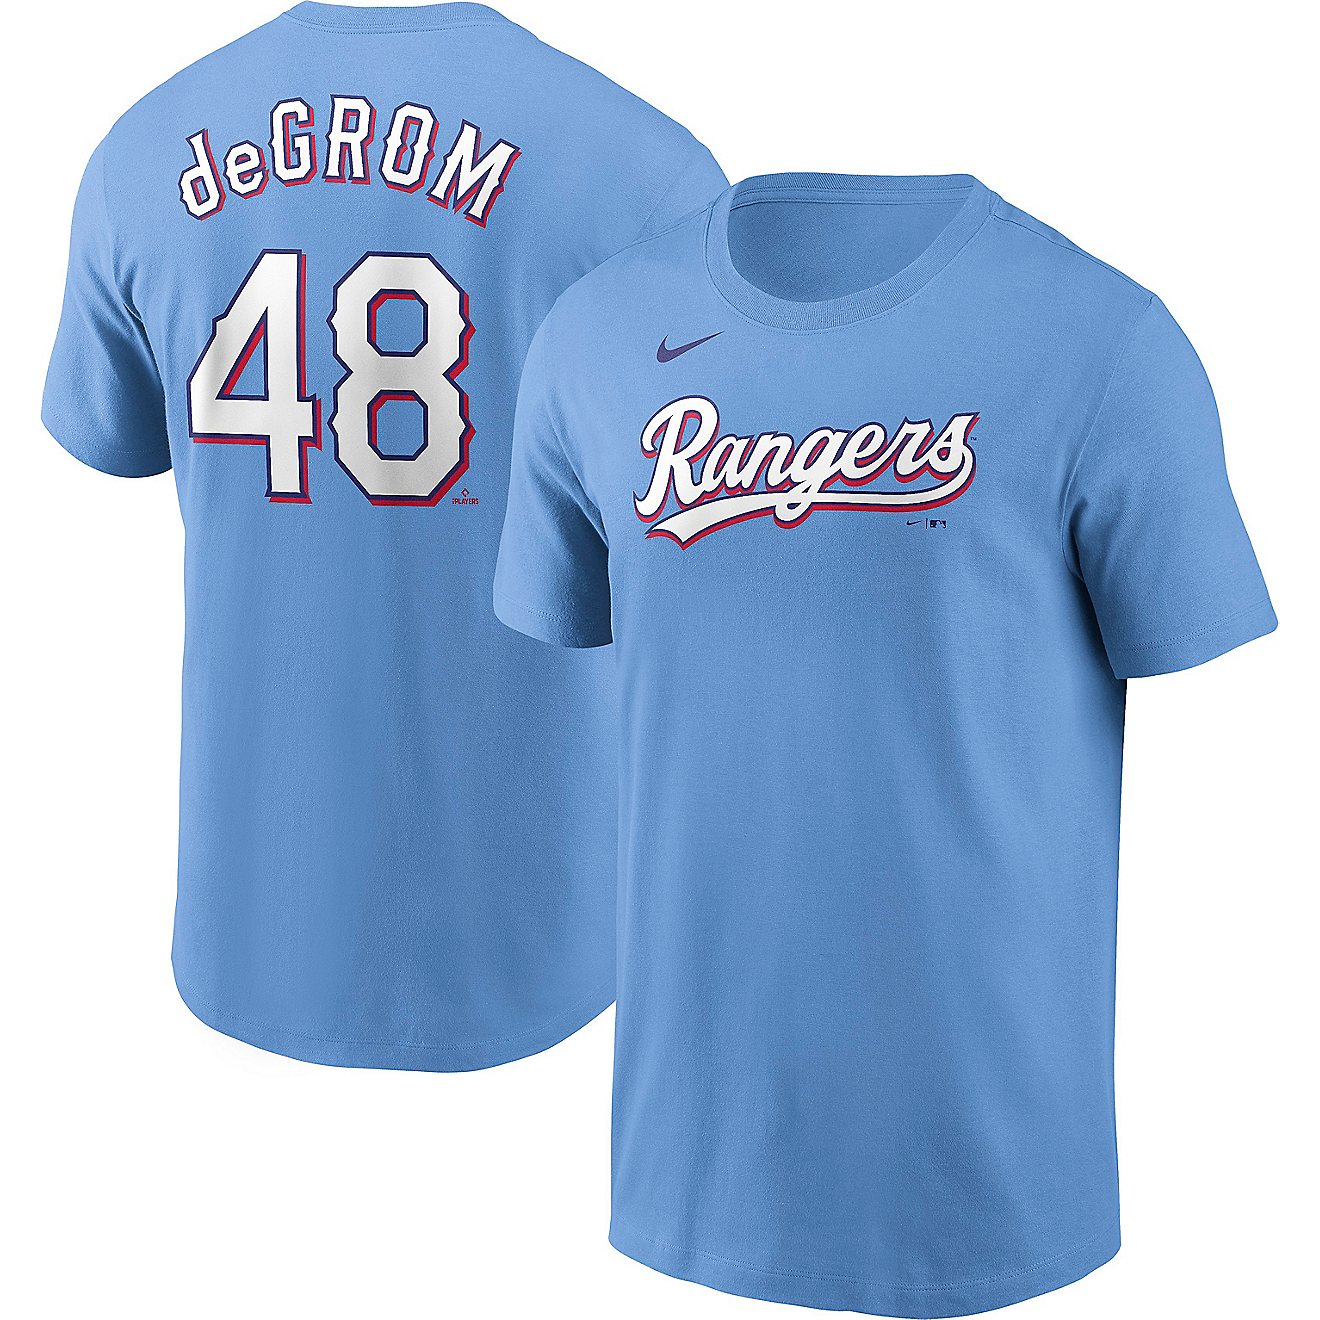 Nike Men's Texas Rangers deGrom Away Name and Number Graphic T